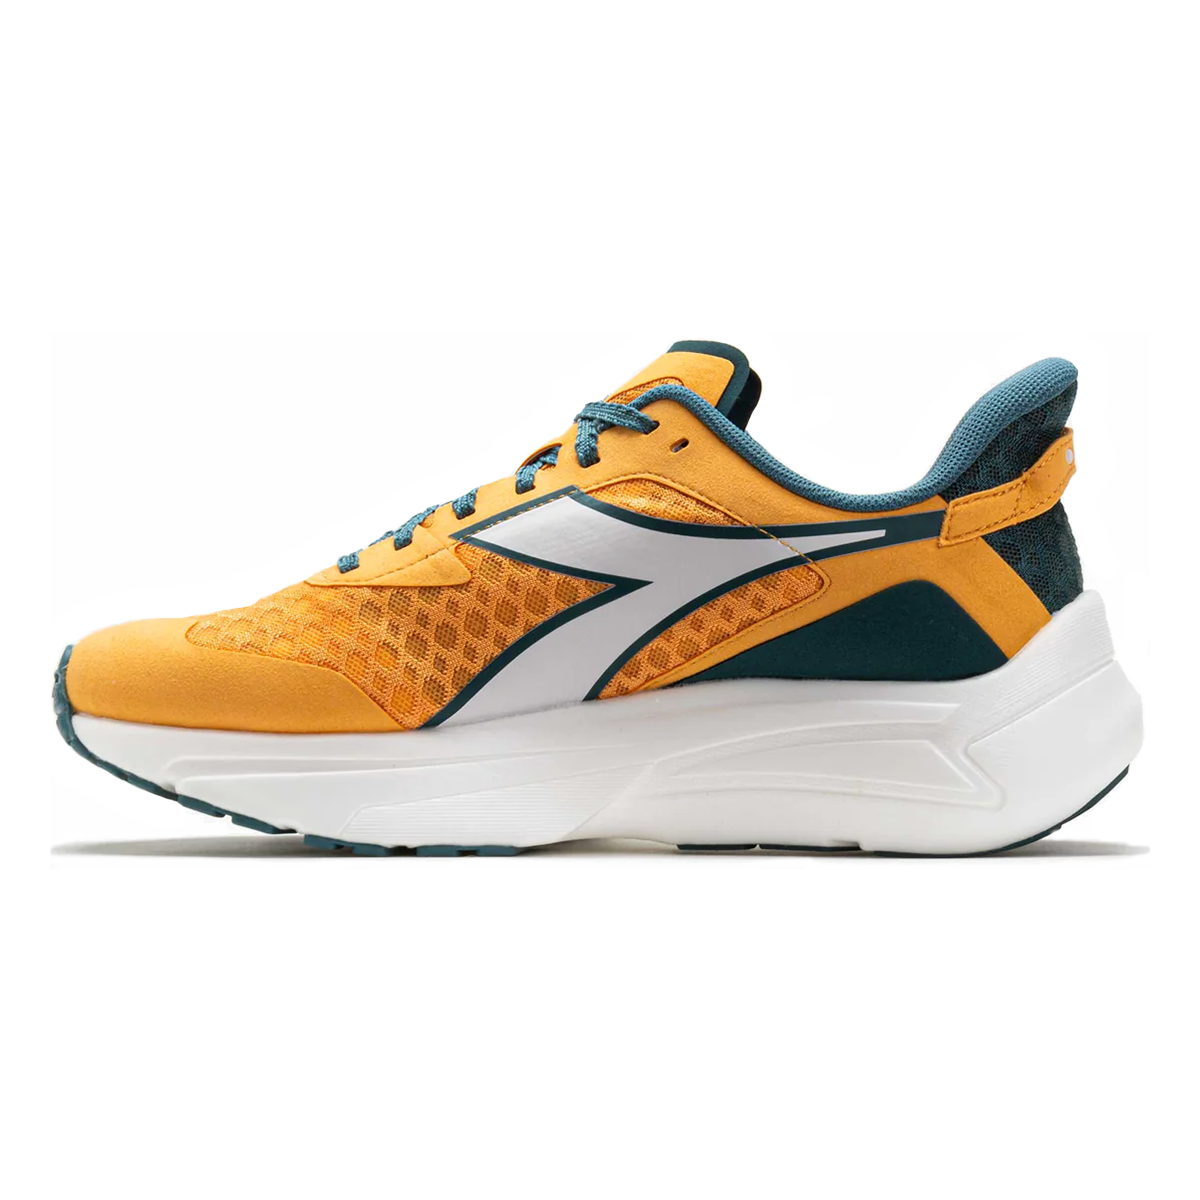 Diadora Frequenza, , large image number null